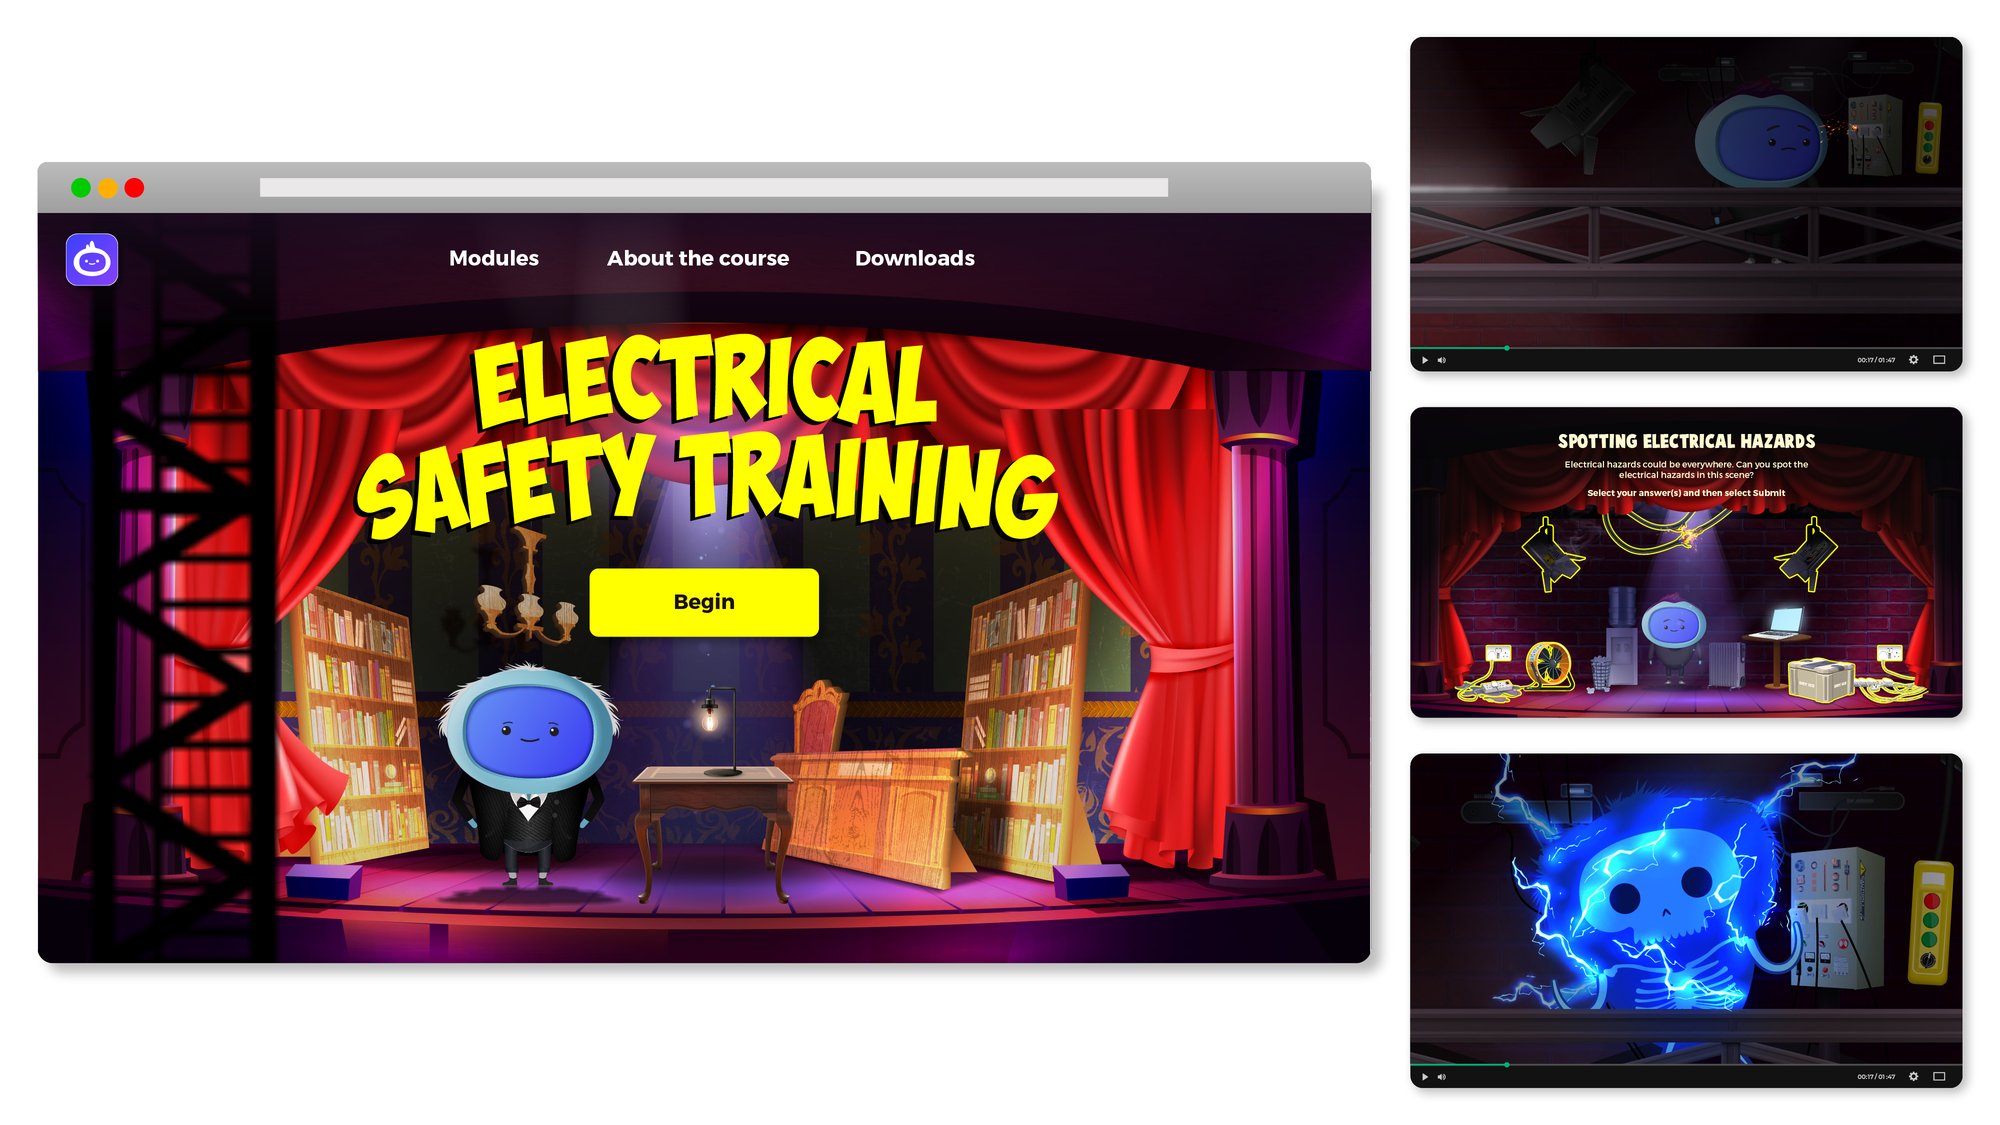 iAM 00083 - Electrical Safety Training - Landing Page 02